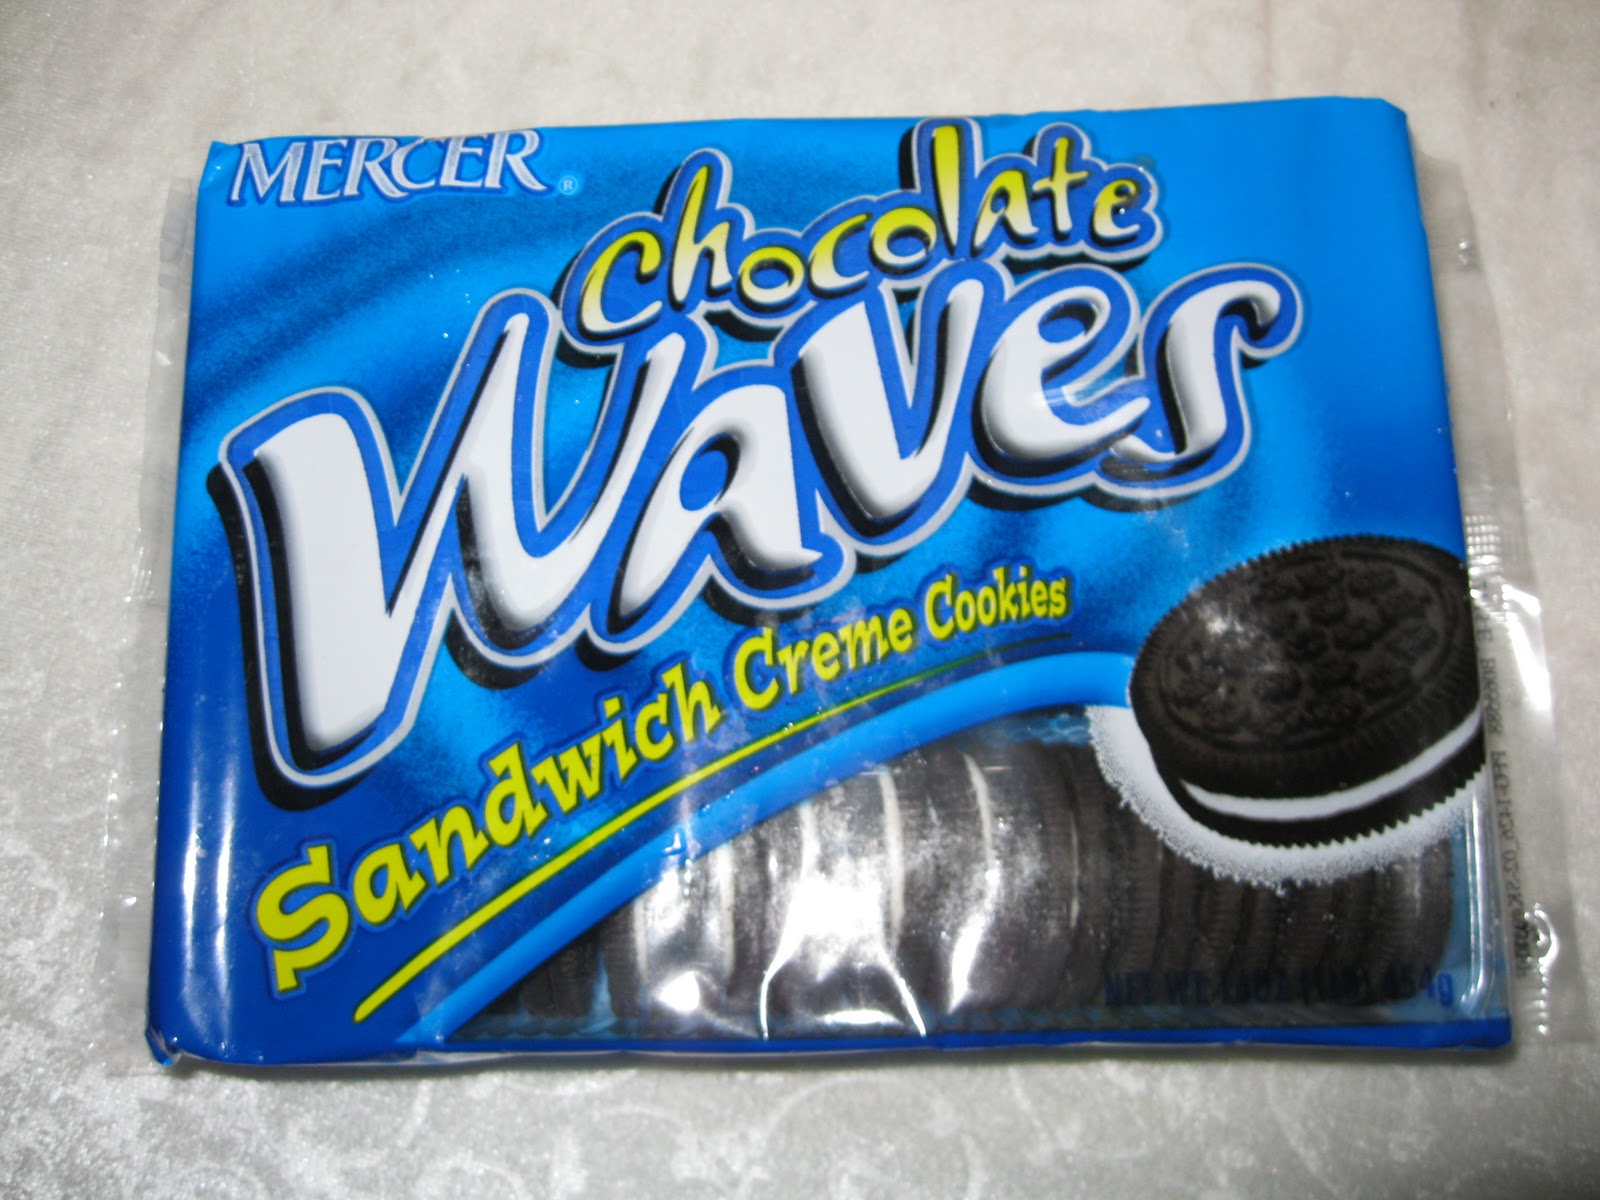 The Aldi Spot - Helping You Save: Aldi Product Review: Mercer Chocolate  Waves (Aldi Oreos ) $1.49